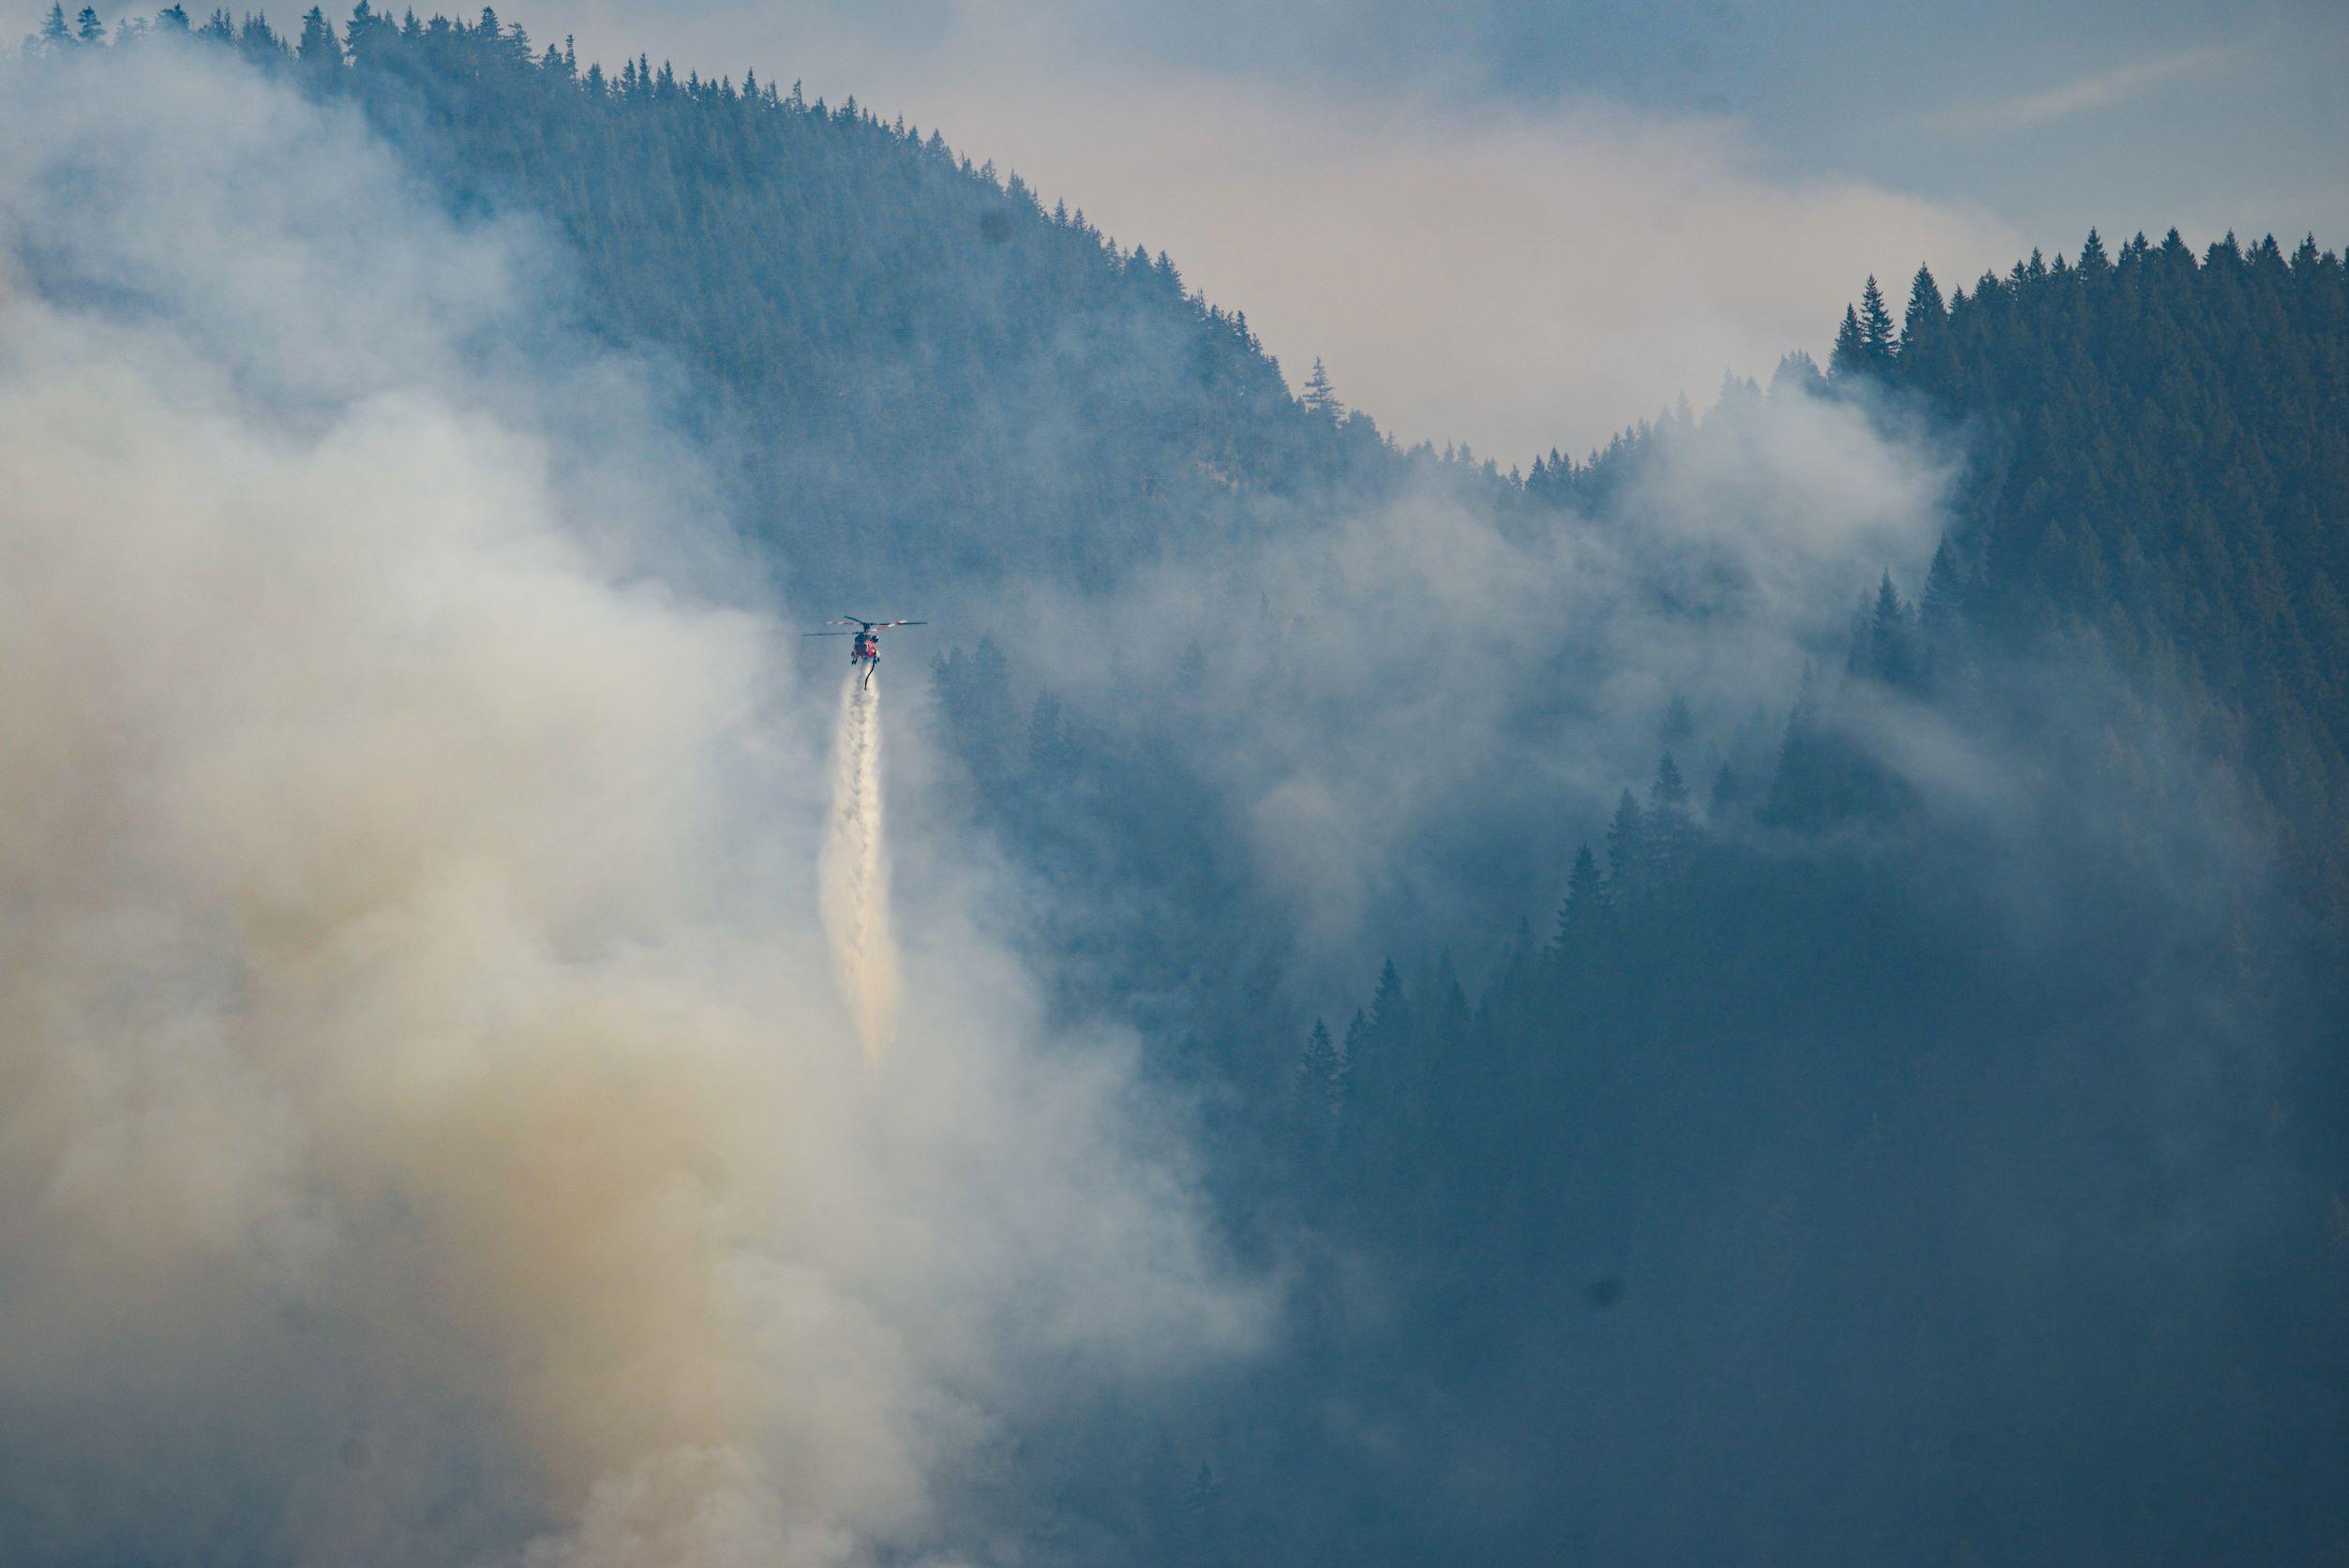 A helicopter is dropping water on the burning forest south of Coal Creek. Smoke rises from the forest on steep slopes below and behind the helicopter.